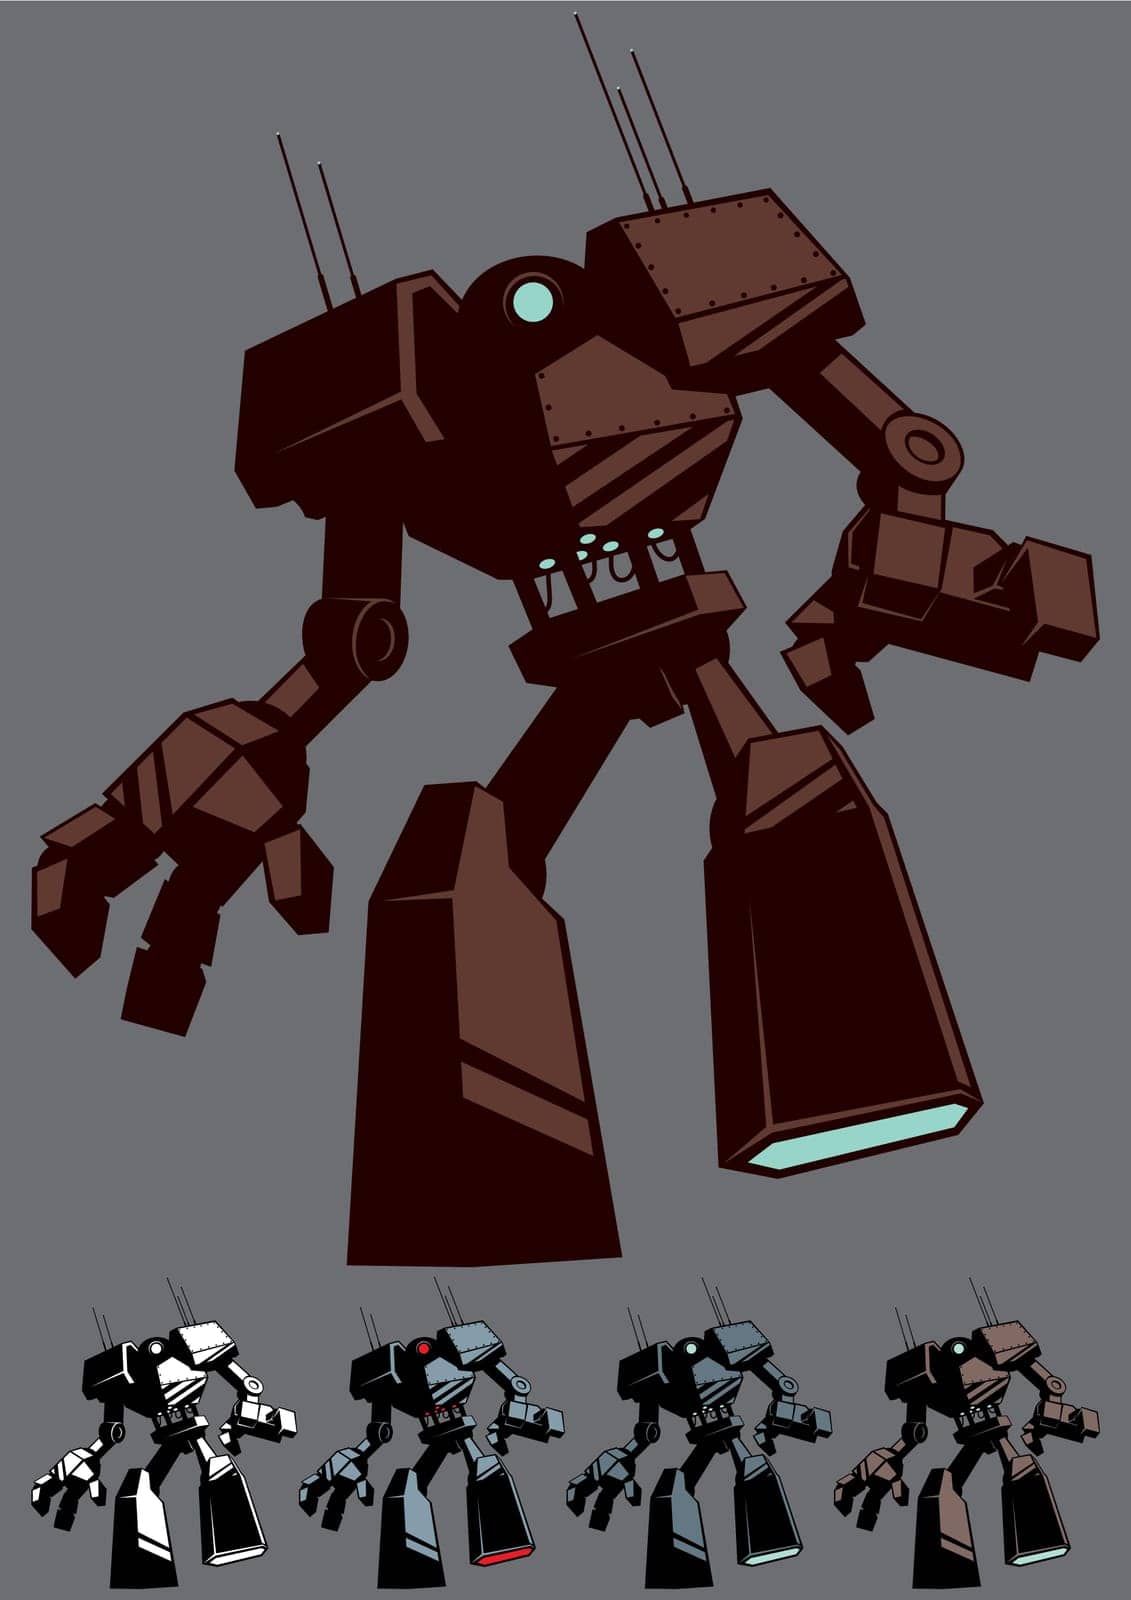 Giant robot in 5 color versions.